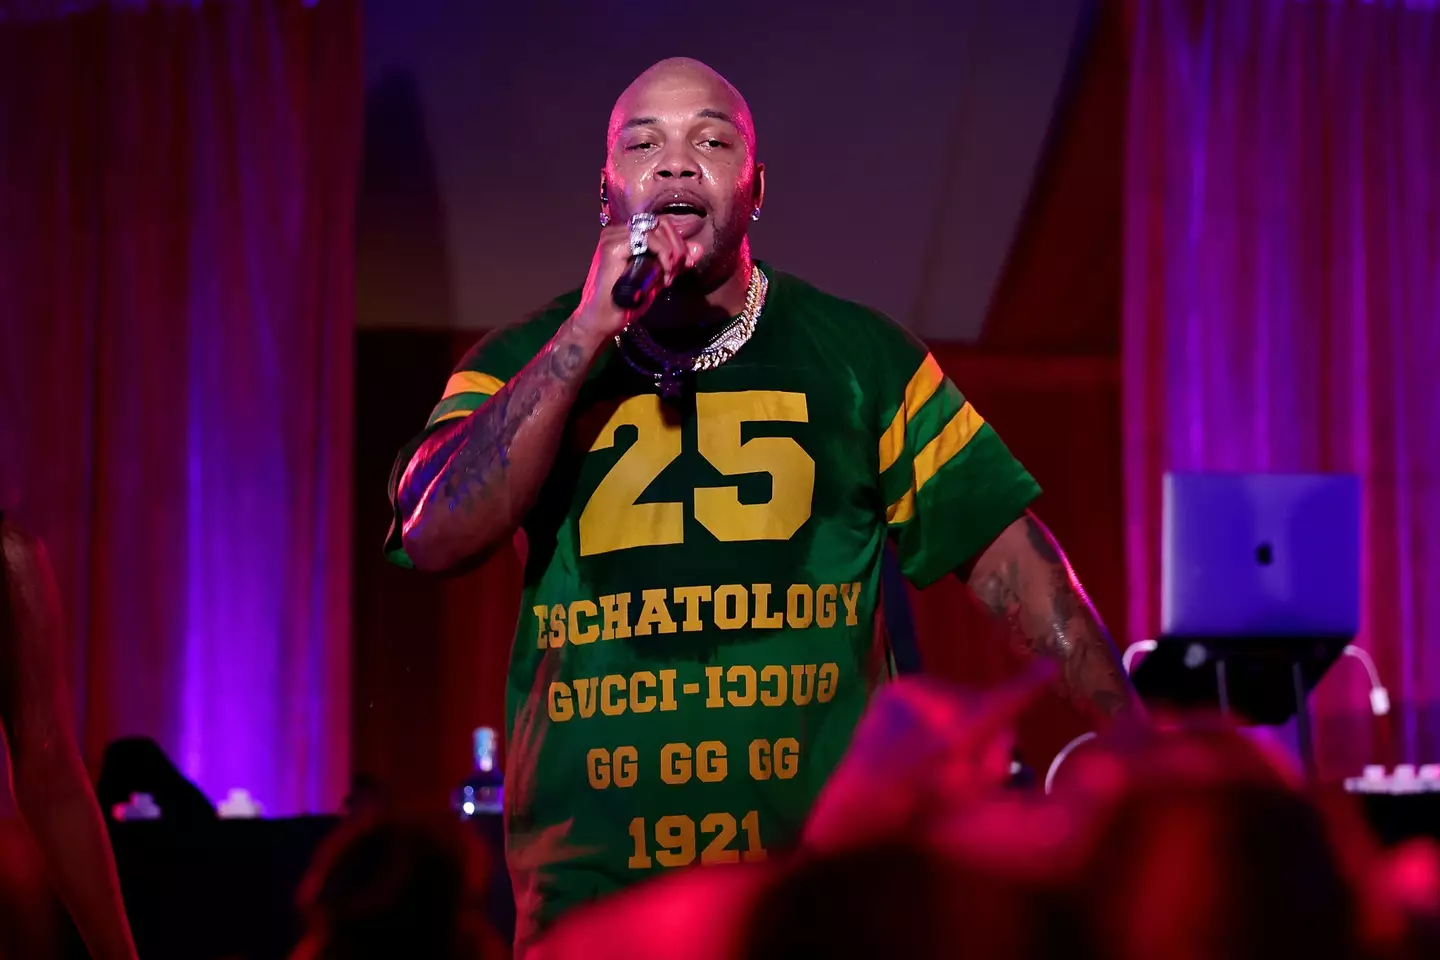 Flo Rida landed on the career-defining stage name when he was just 17.